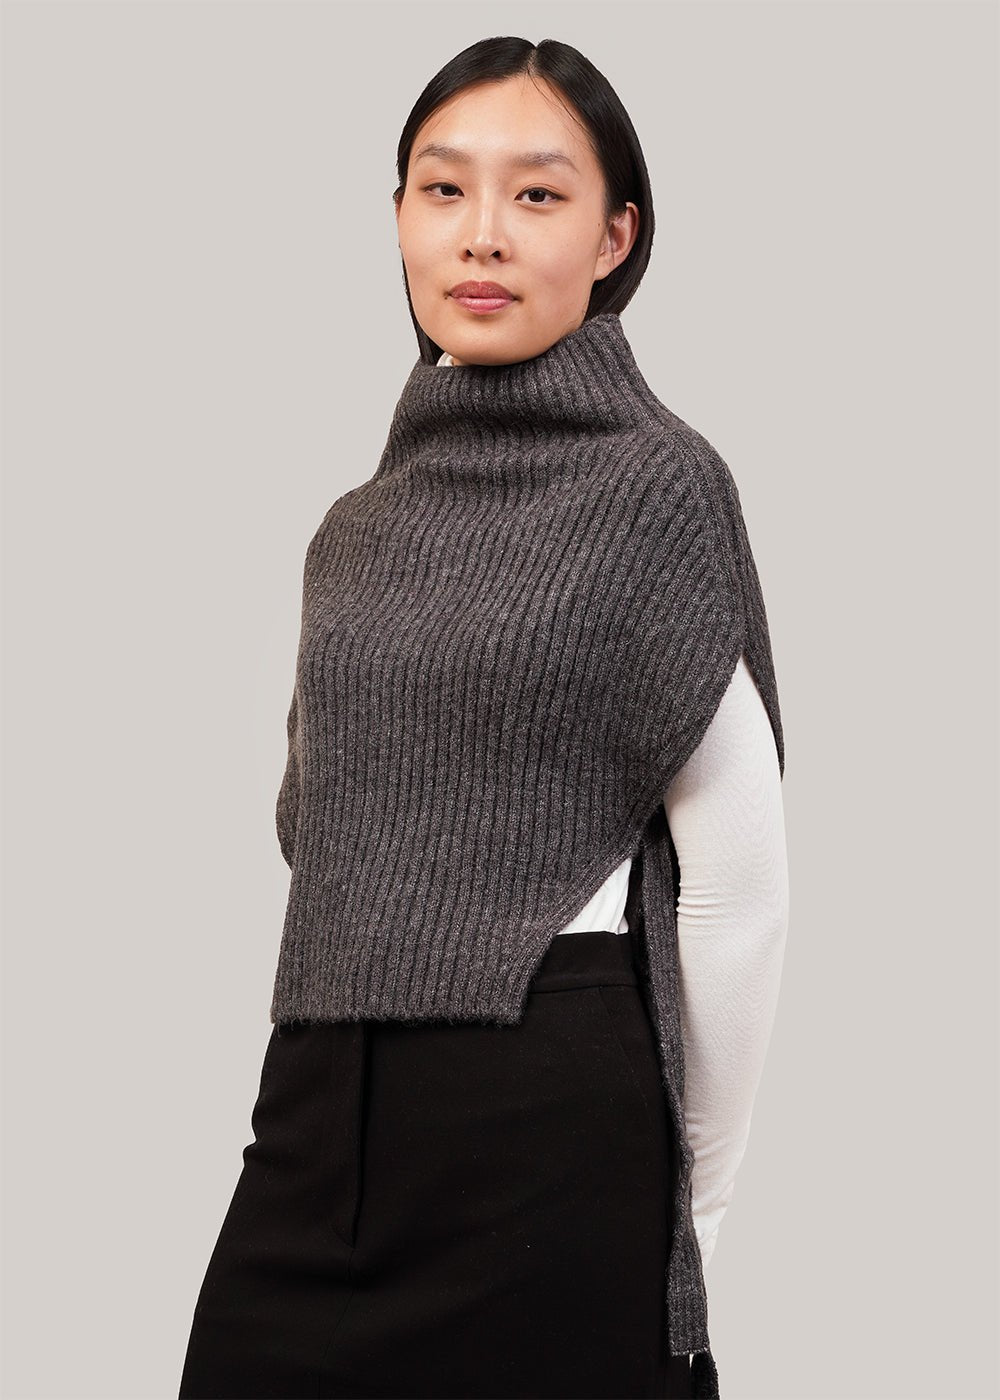 Mijeong Park White Roll Neck Jersey Top - New Classics Studios Sustainable Ethical Fashion Canada